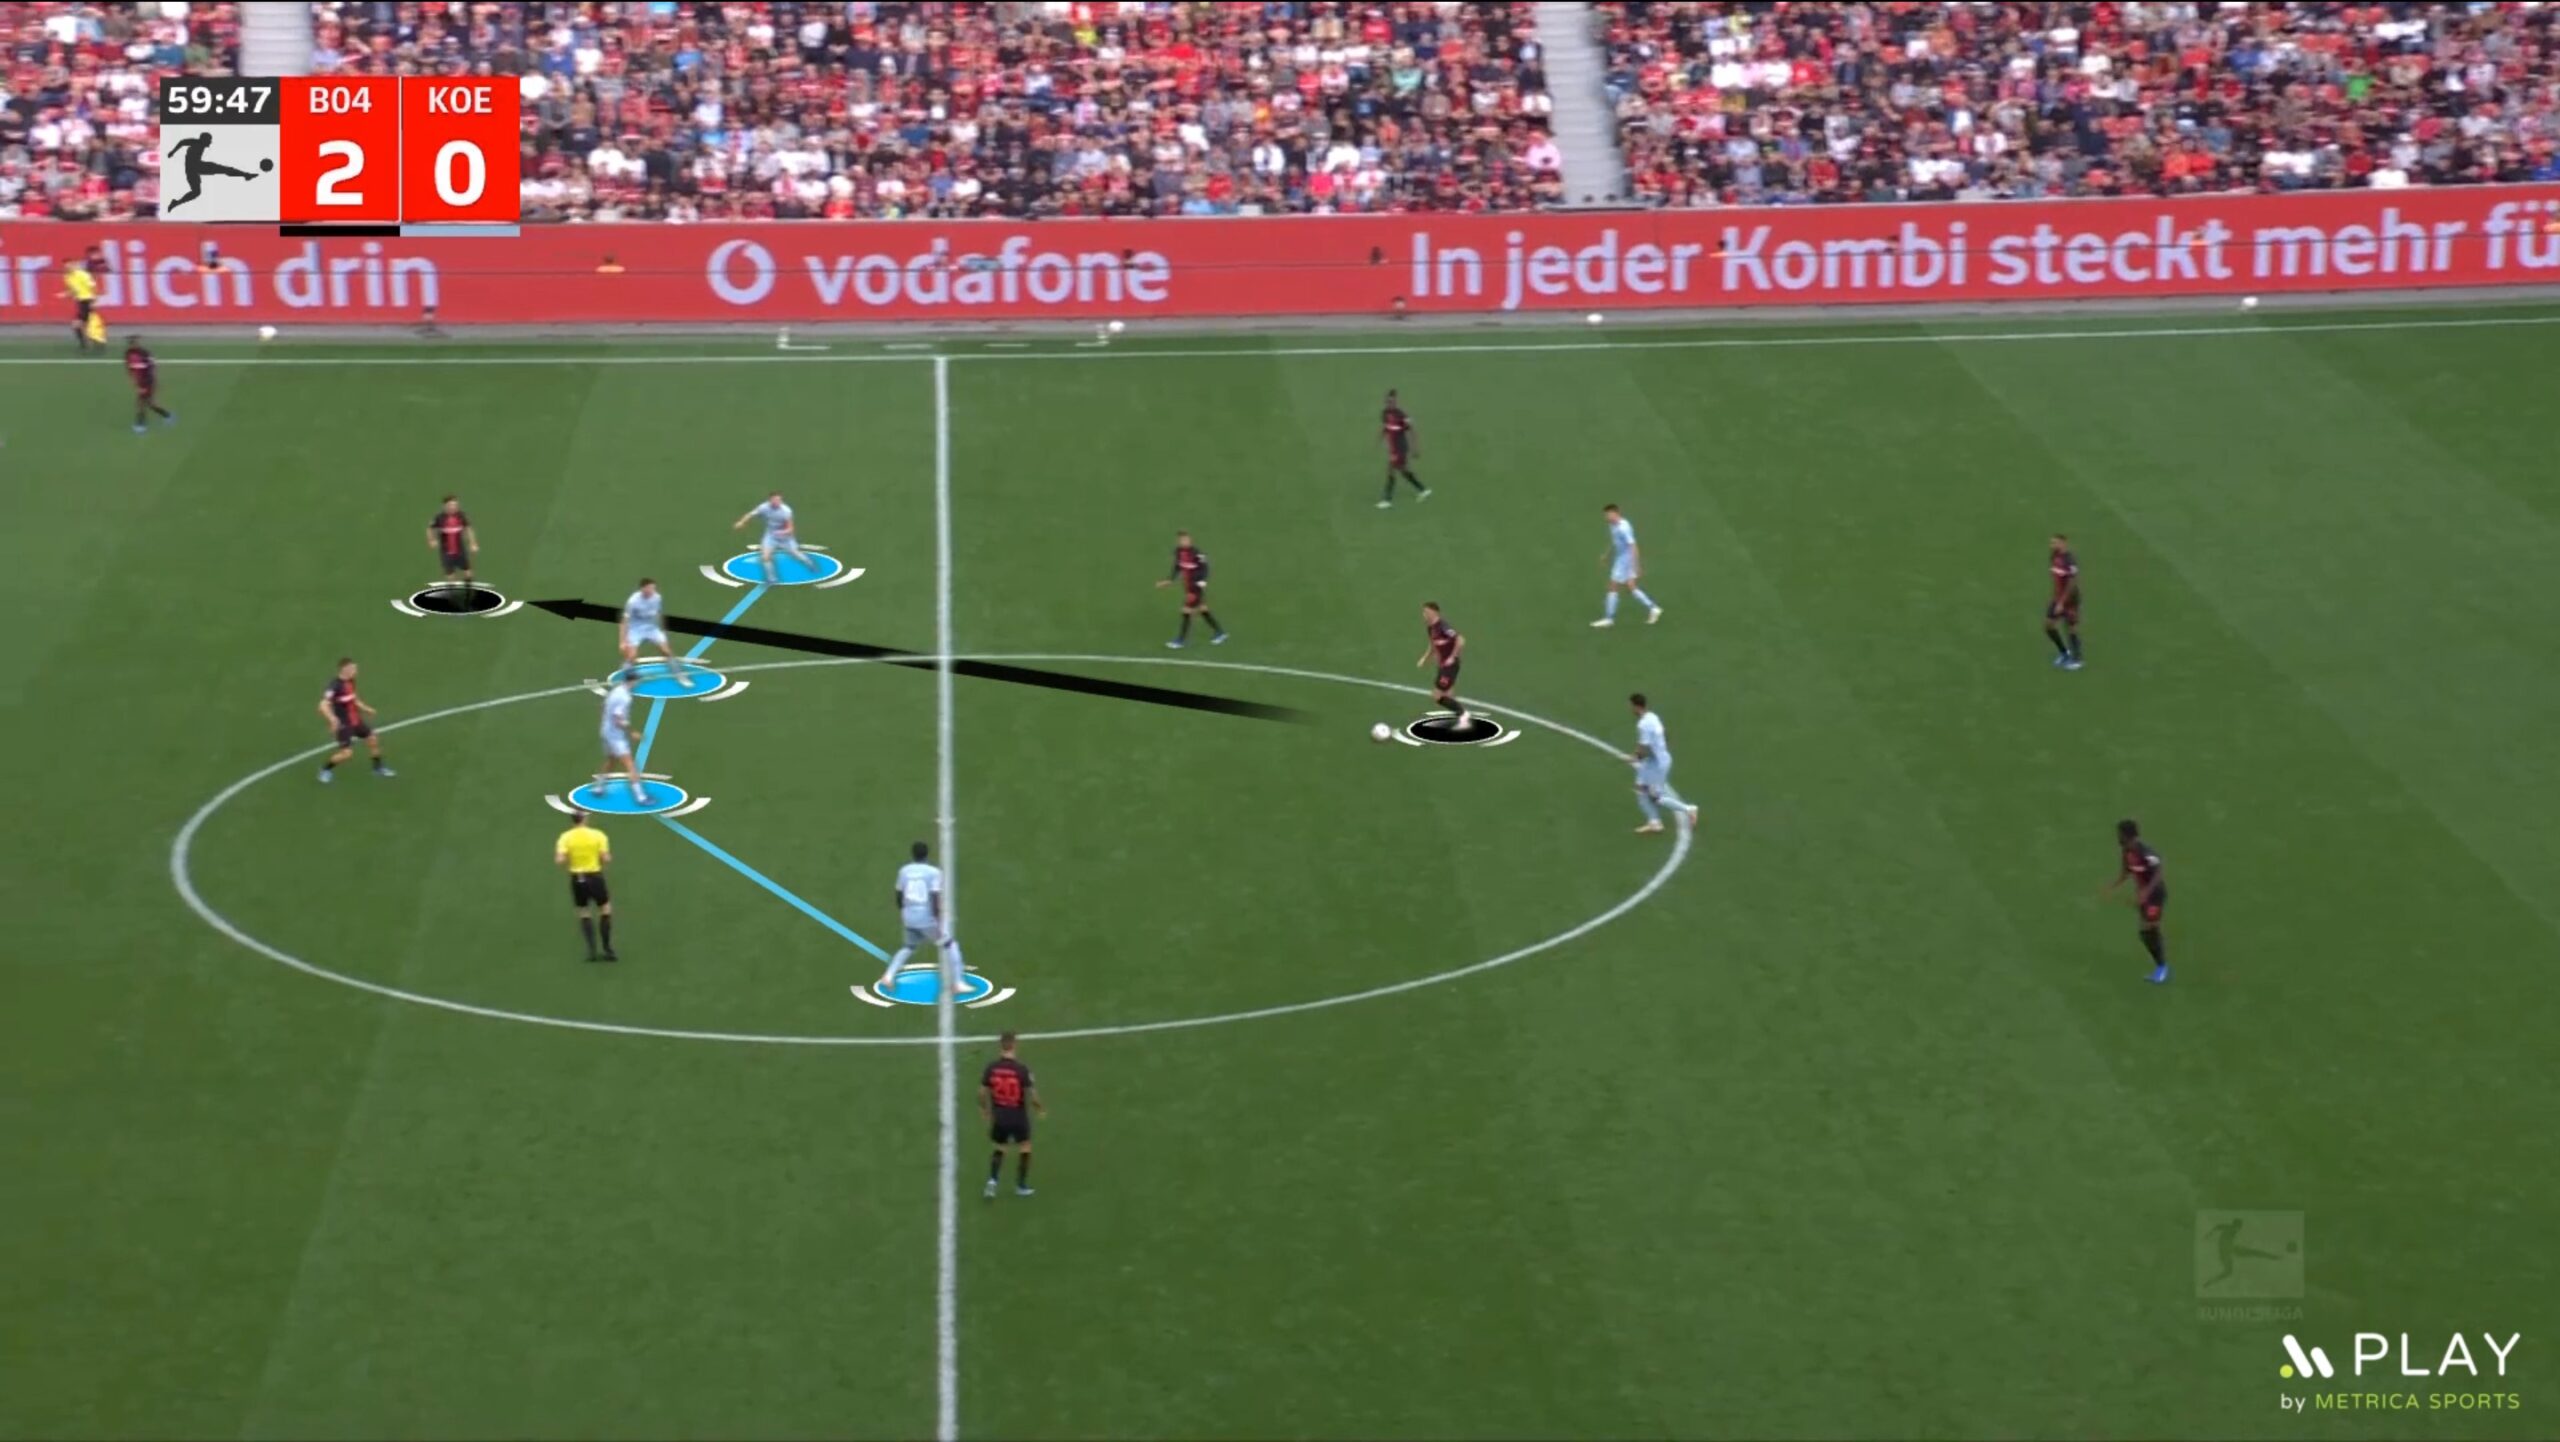 Key Concepts for Good Ball Circulation. Progression Support. Hofmann (Advanced Midfielder, Bayer Leverkusen) understand his teammate is not pressed and has time to play. Therefore, offers a passing line in diagonal, behind the opponent's midfielders line to surpass and accelerate the attack.